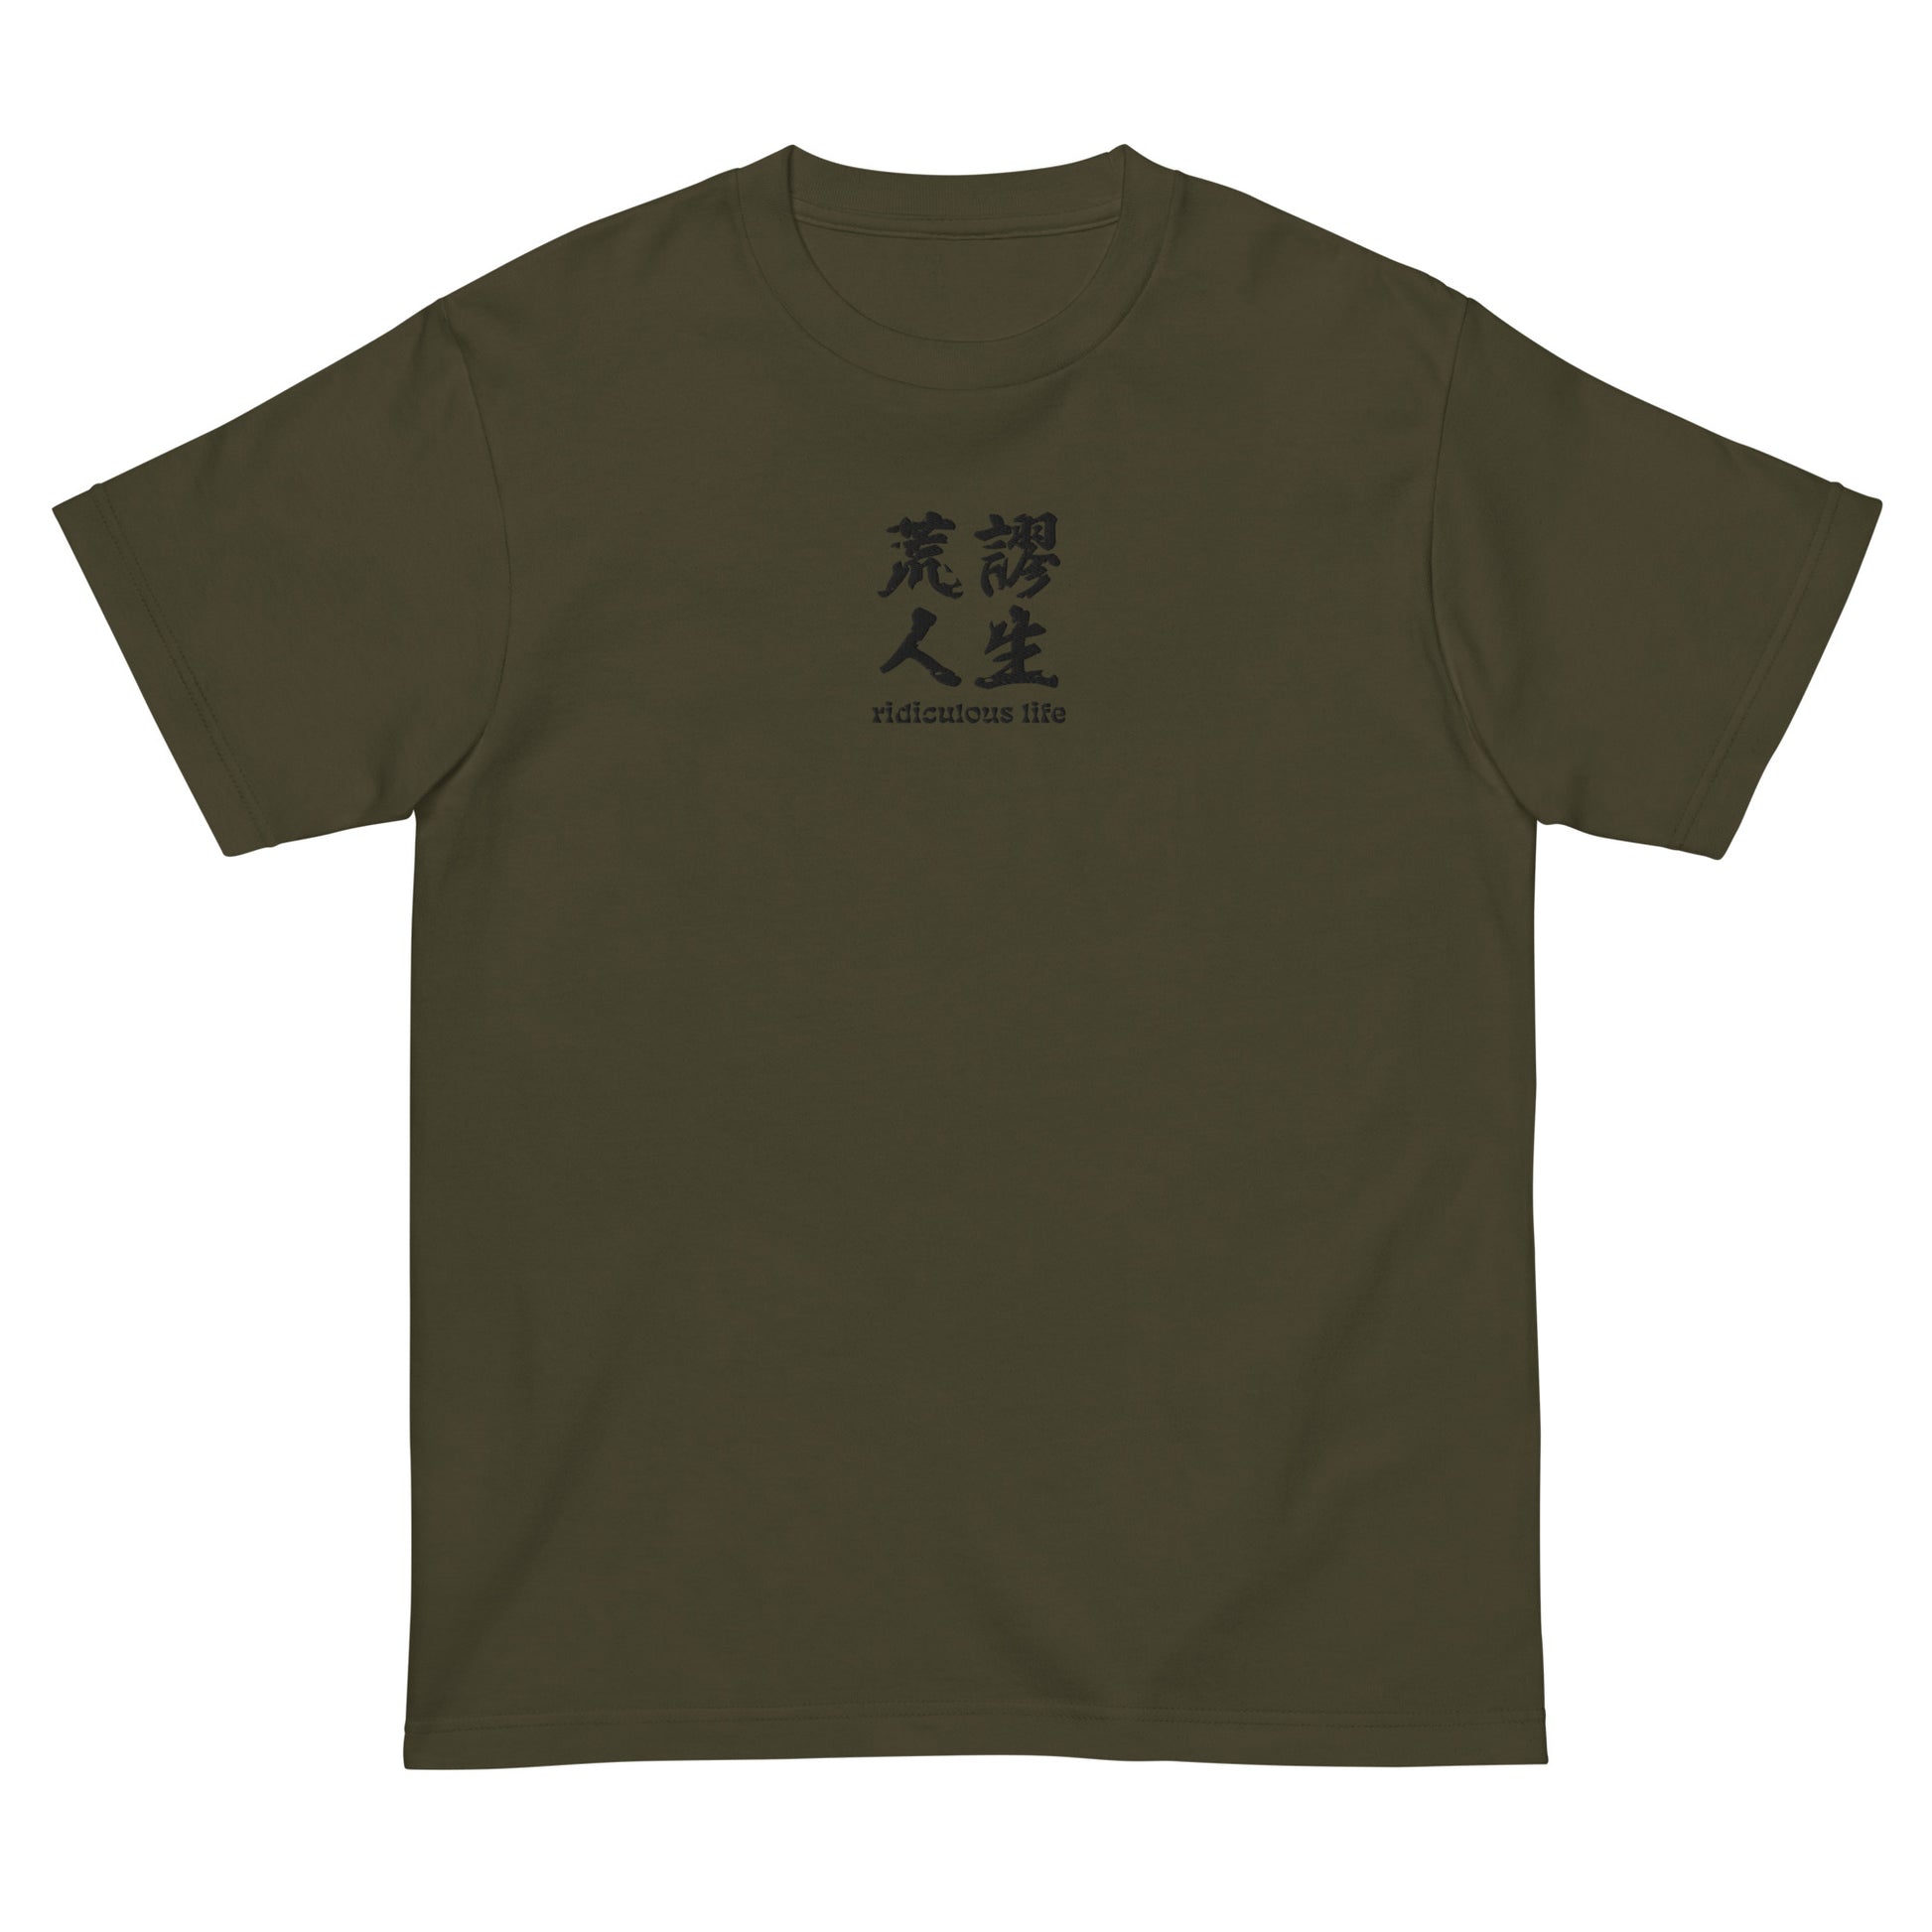 Green High Quality Tee - Front Design with an Black Embroidery "Ridiculous Life" in Chinese and English